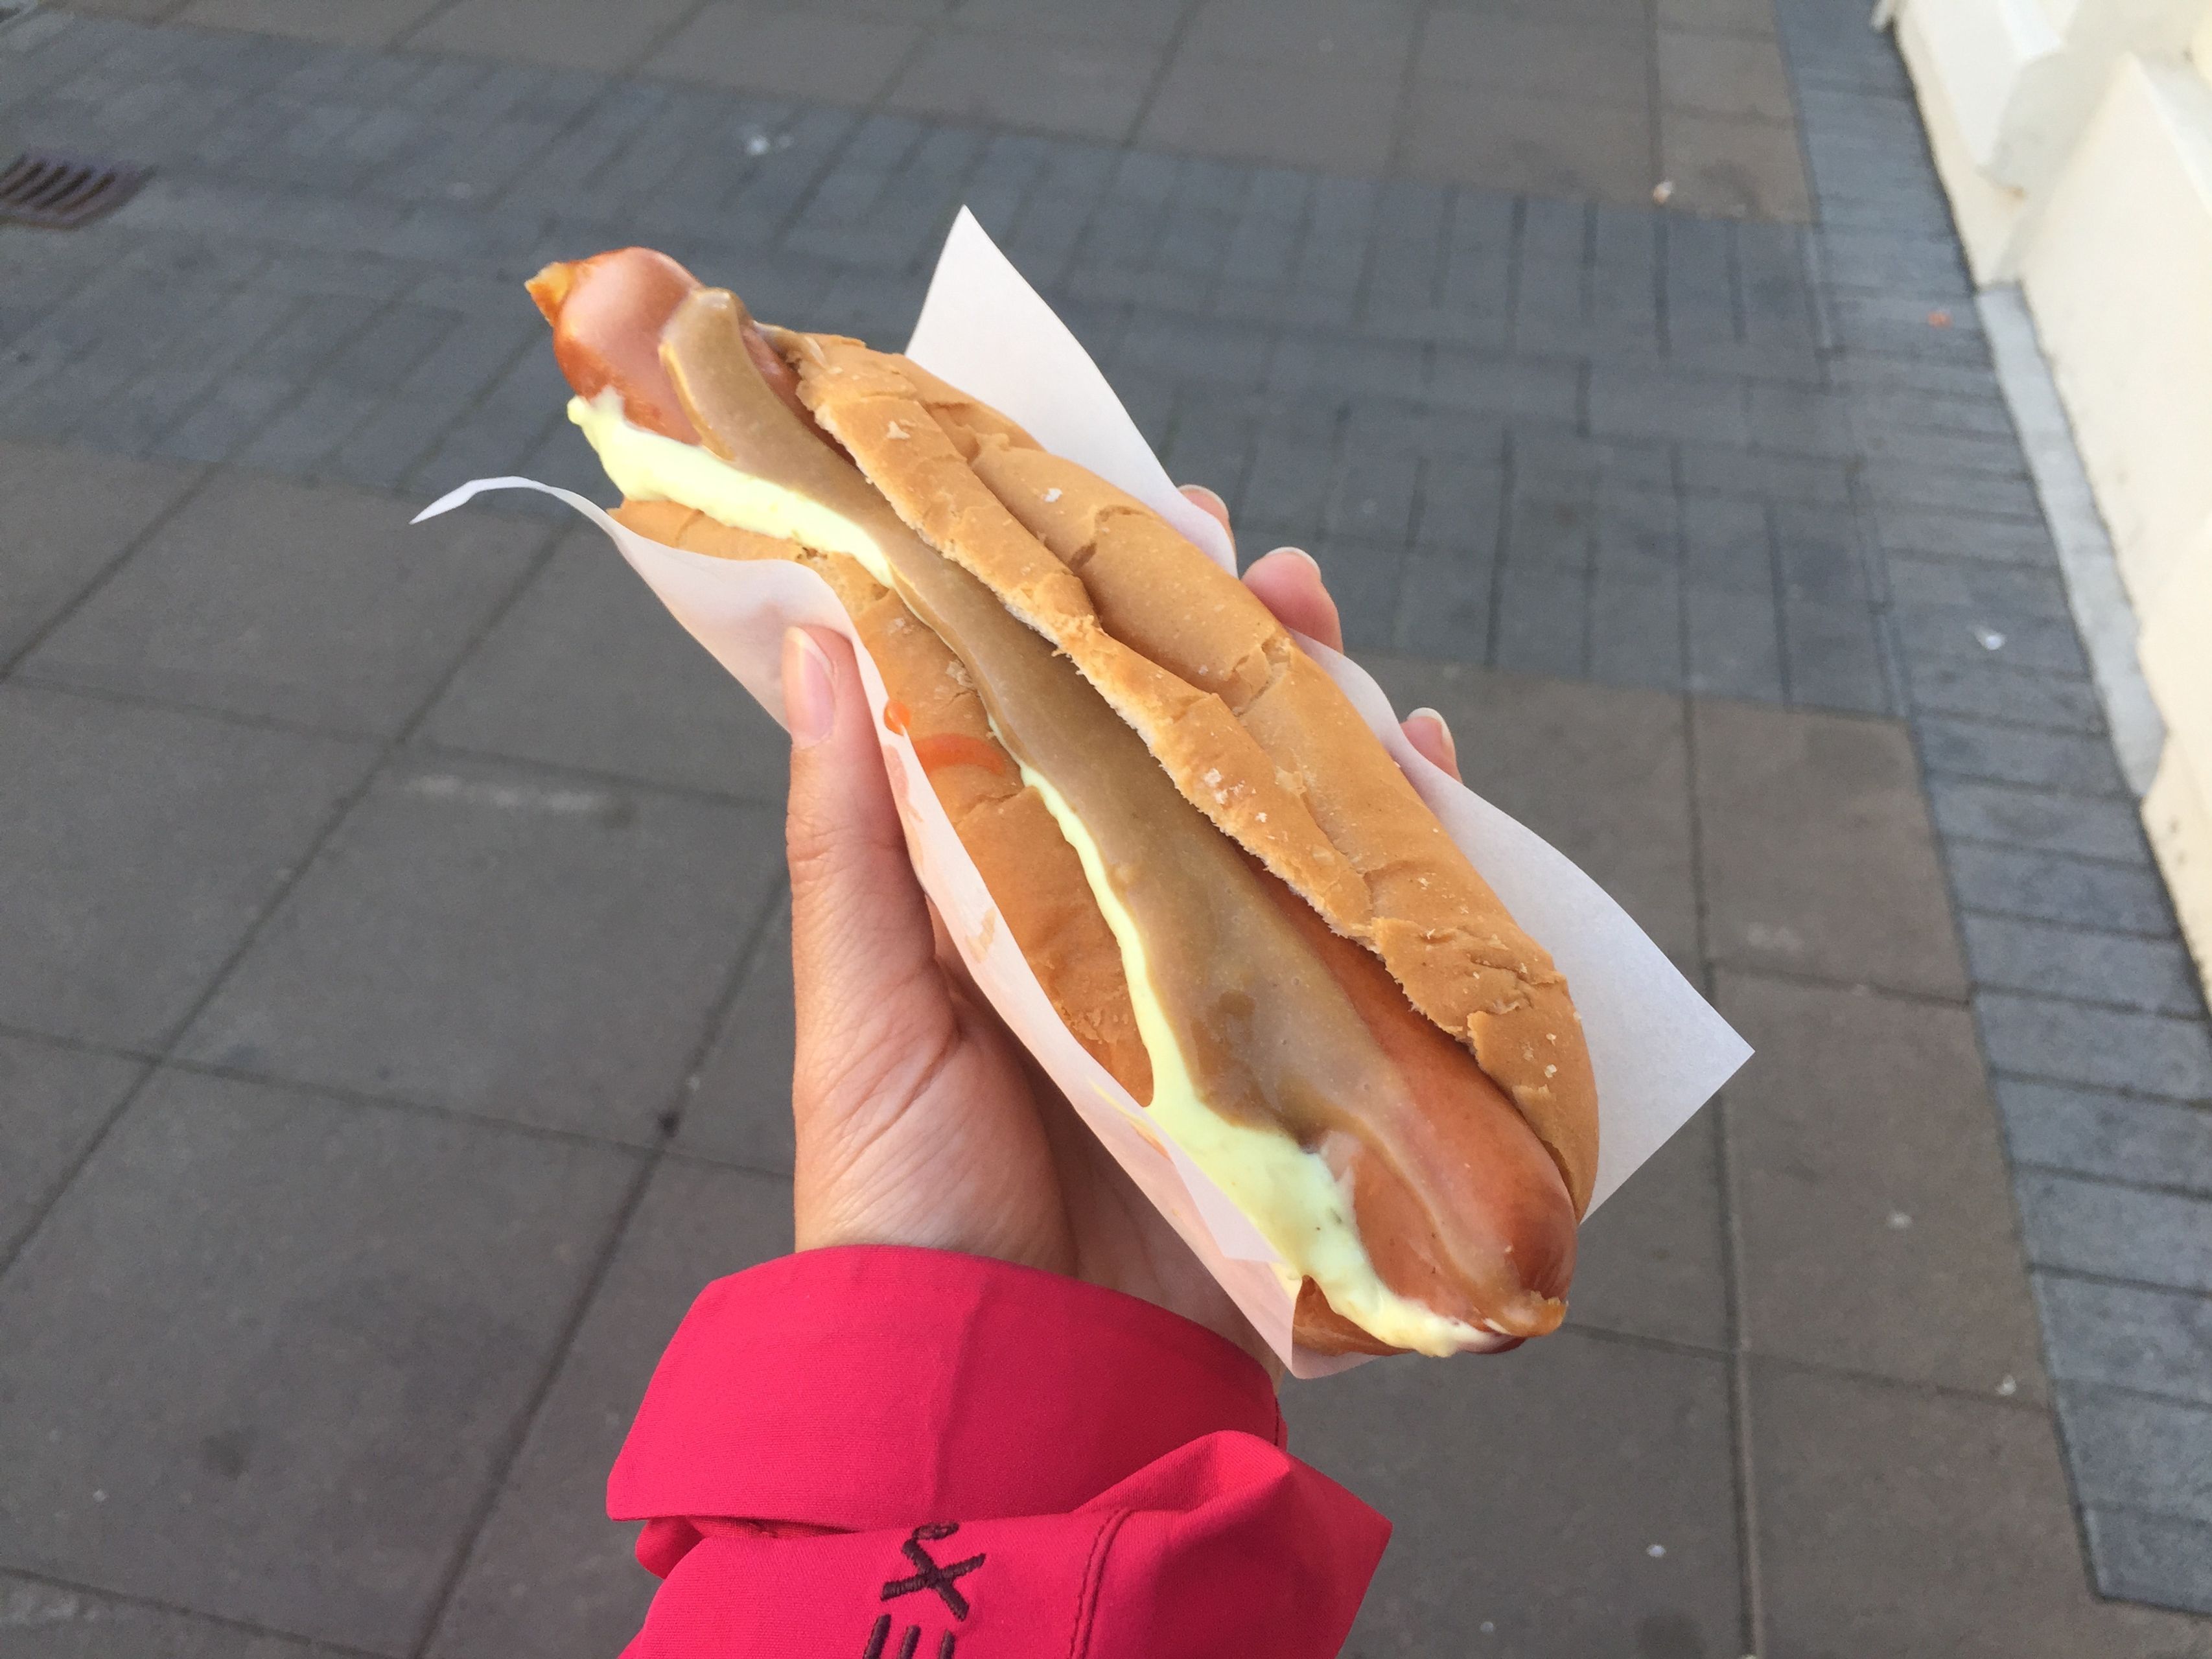 A delicious Icelandic hot dog served in a bun with traditional toppings, a must-try street food in Iceland.